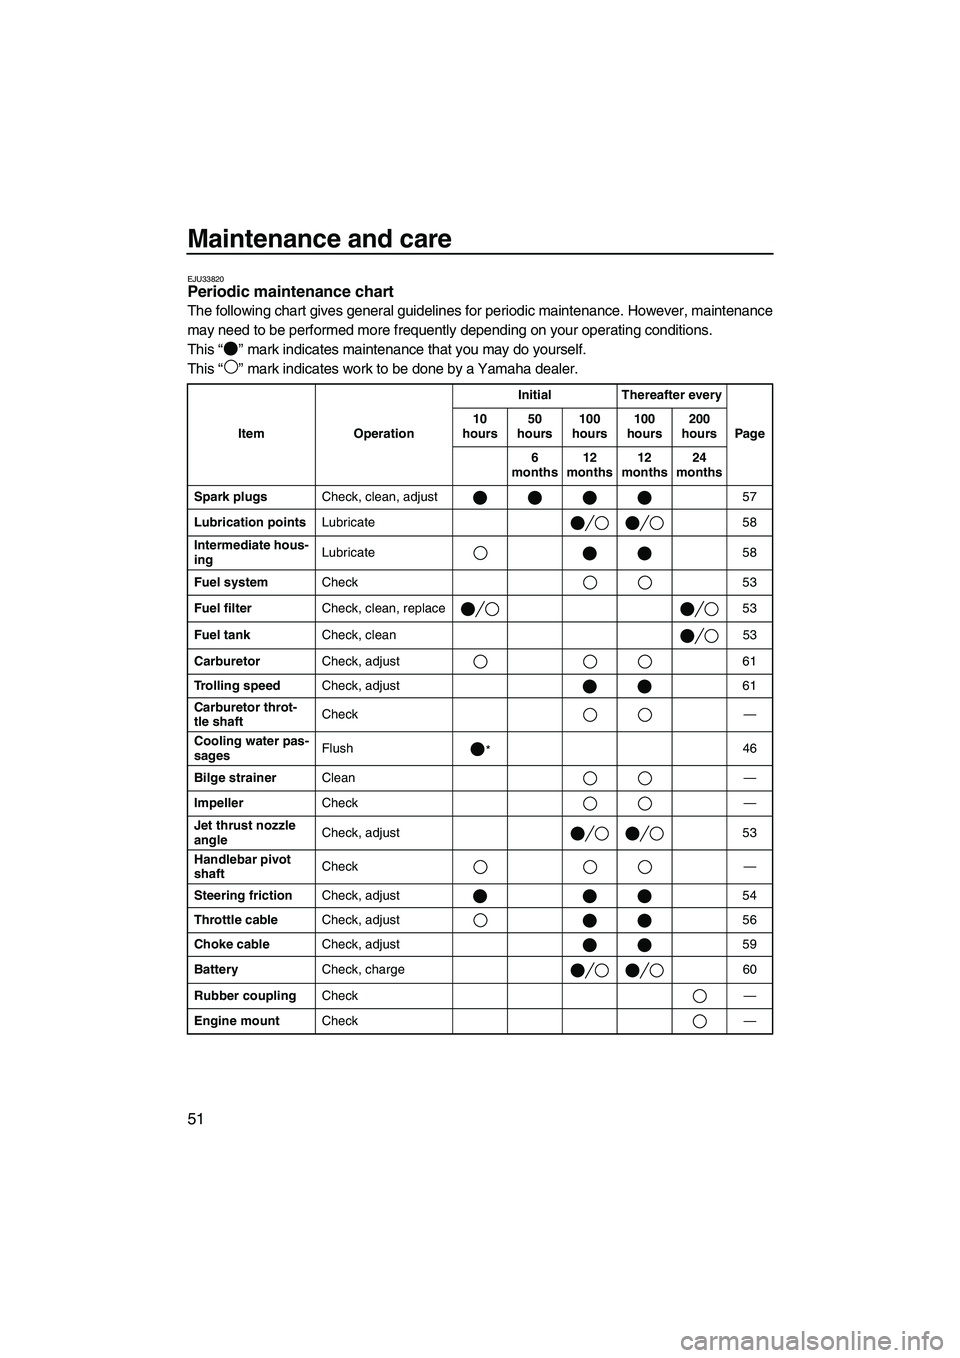 YAMAHA SUPERJET 2008  Owners Manual Maintenance and care
51
EJU33820Periodic maintenance chart 
The following chart gives general guidelines for periodic maintenance. However, maintenance
may need to be performed more frequently dependi